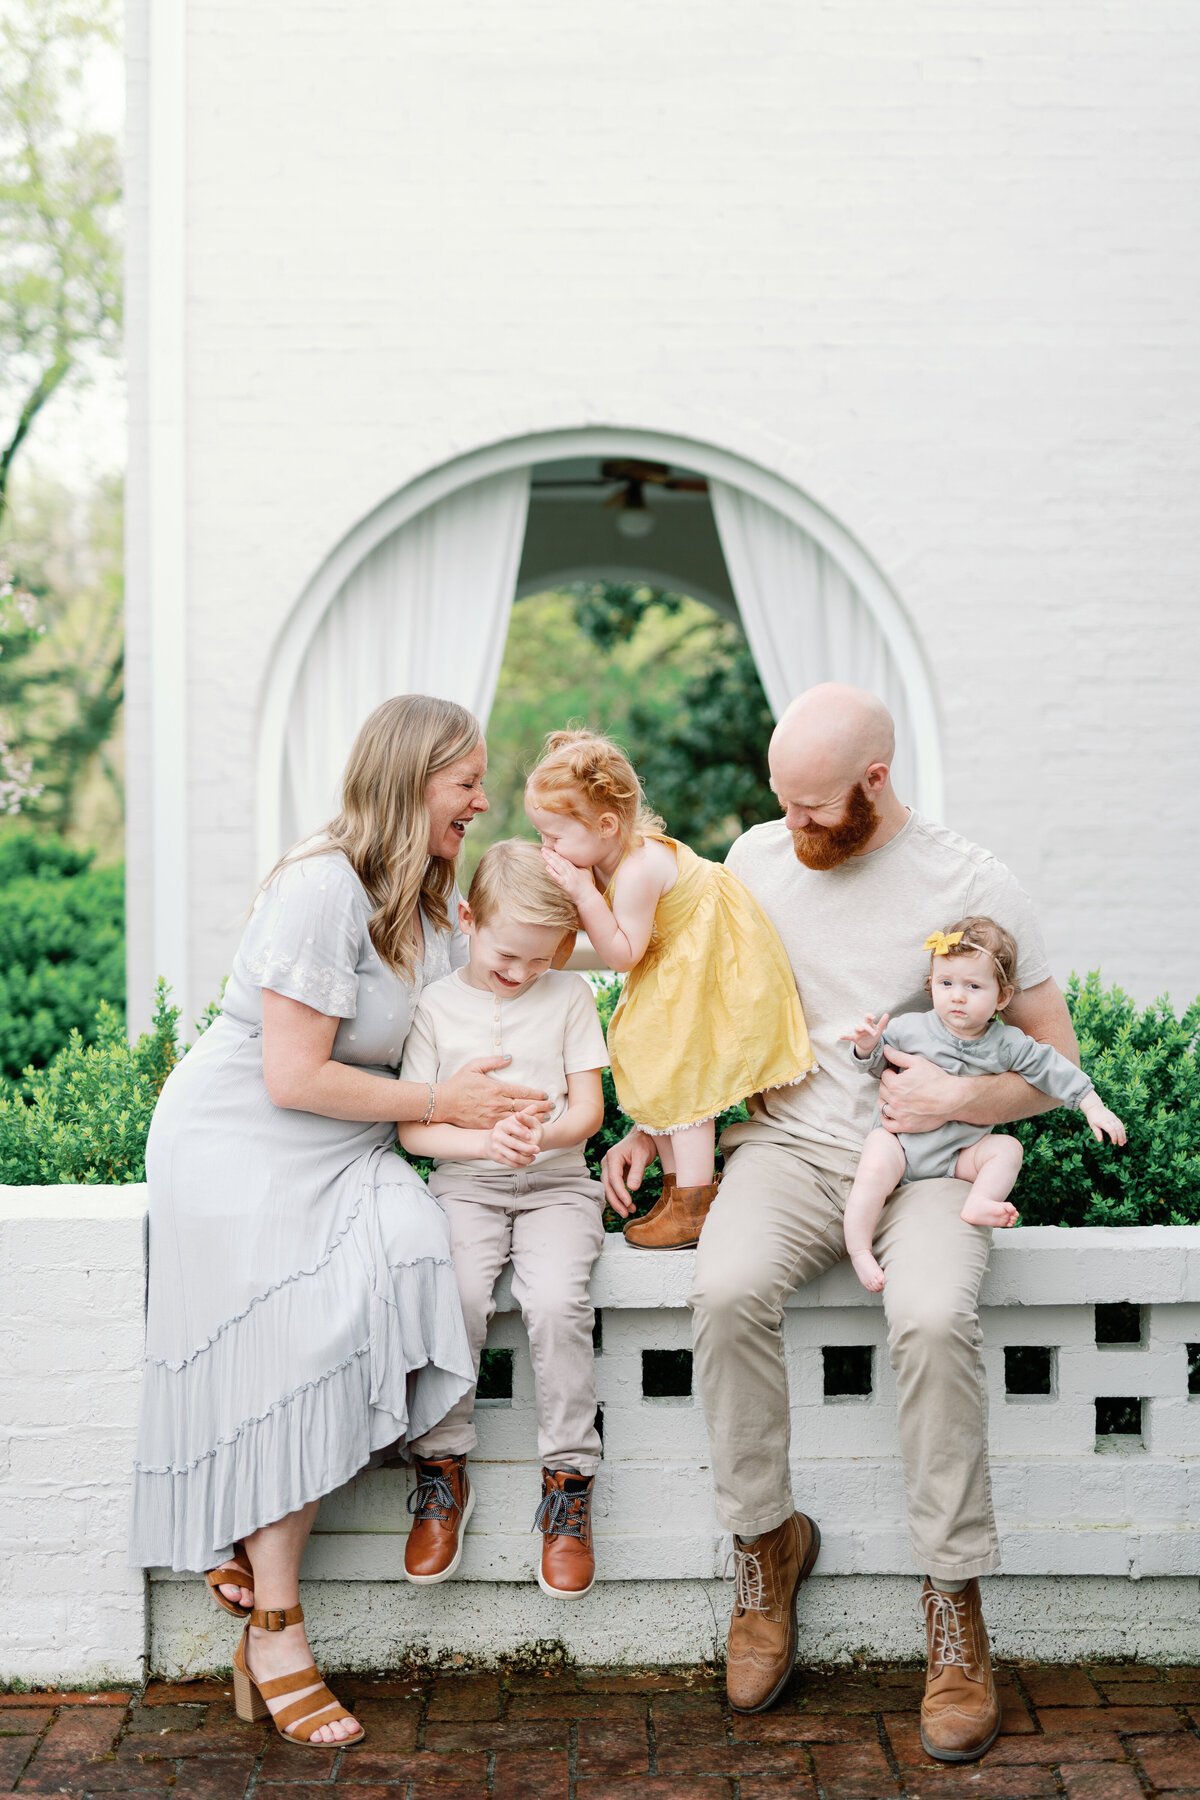 Fothergill Family Session - Maple Grove Estate - East Tennessee Portrait Photogrpher - Alaina René Photography-25 2